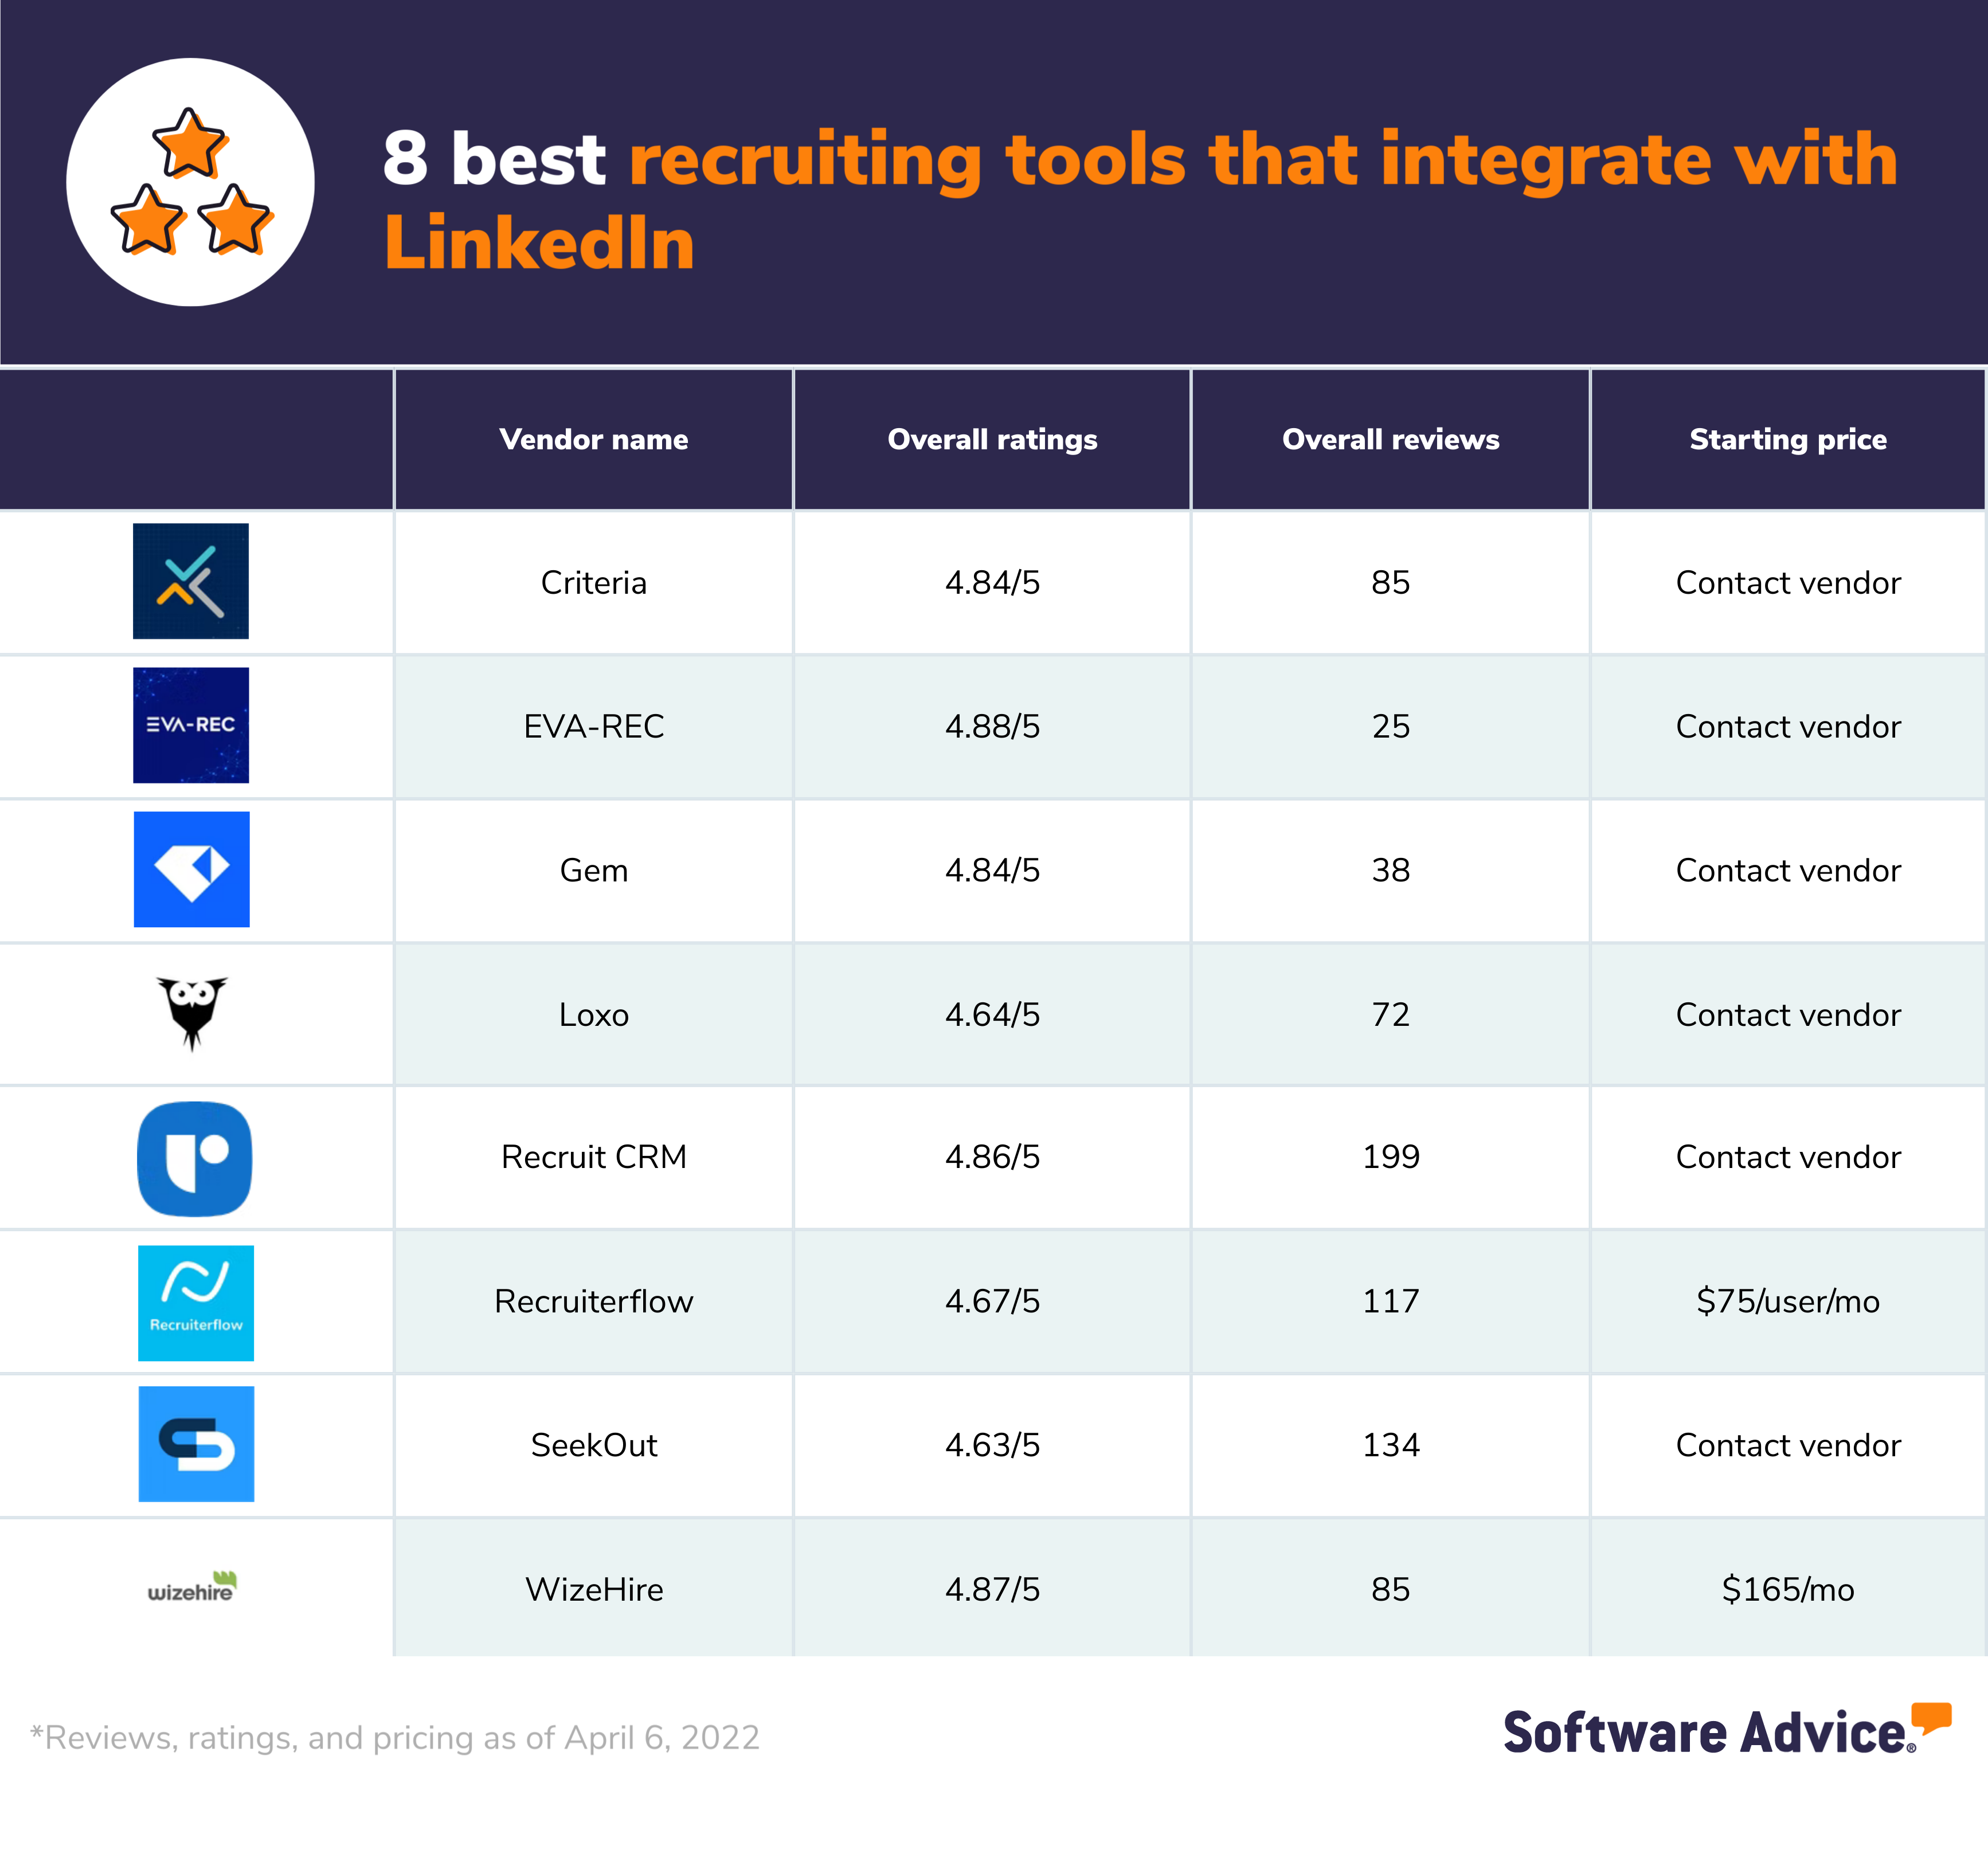 8 best recruiting tools that integrate with LinkedIn